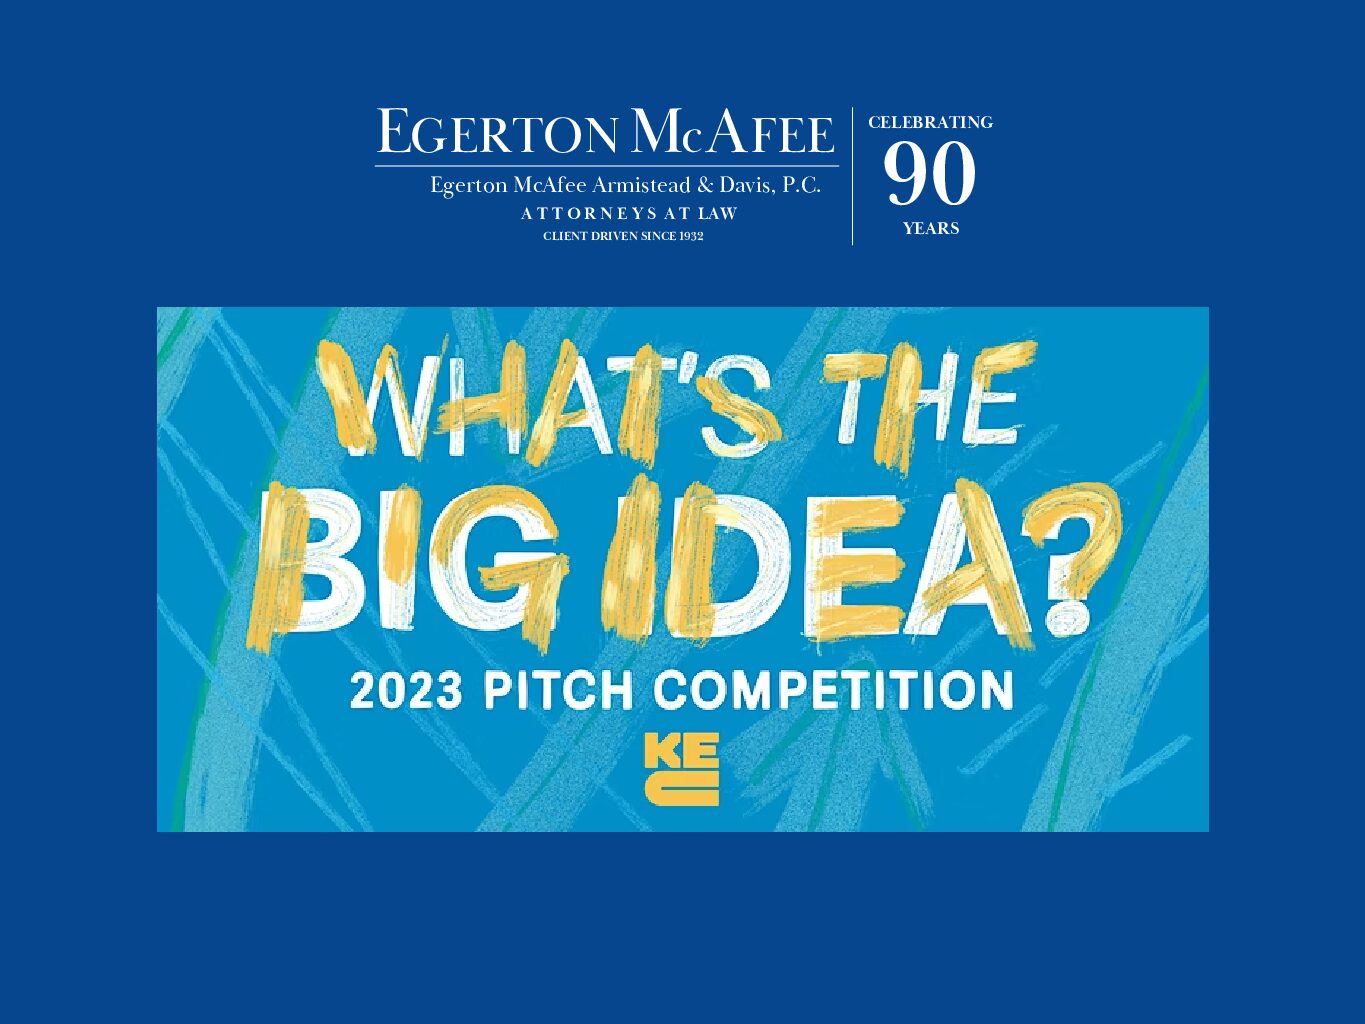 Egerton McAfee Sponsors: What’s The Big Idea? 2023 Pitch Competition